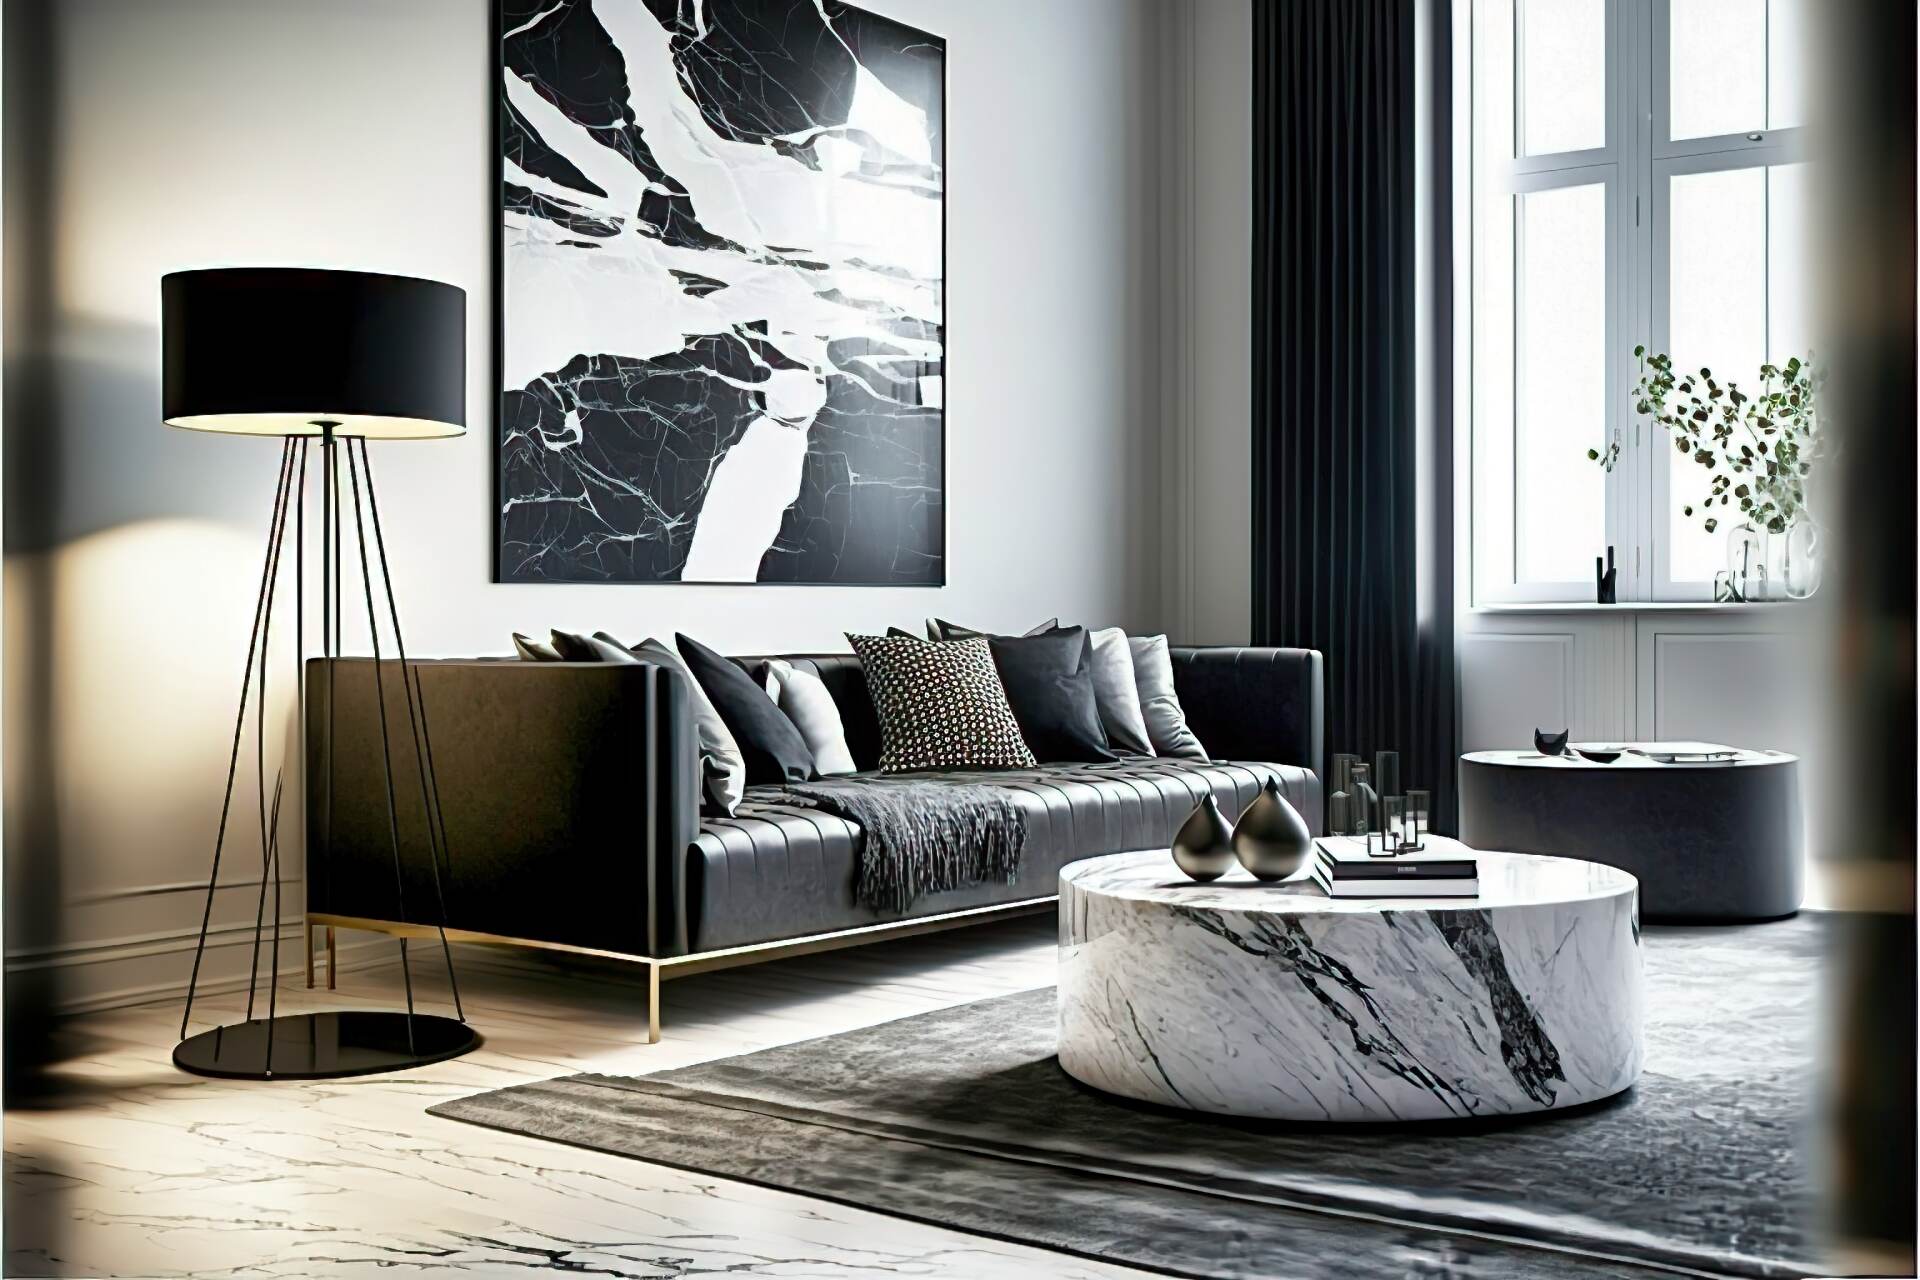 A Modern Living Room In Shades Of Black And White, With A Sleek Marble Coffee Table And A Large Black Velvet Sofa. A Contemporary Rug On The Floor And A Floor Lamp With A Black Shade. A Few Art Pieces On The Wall, And A Few White Cushions On The Sofa, Complete The Look.